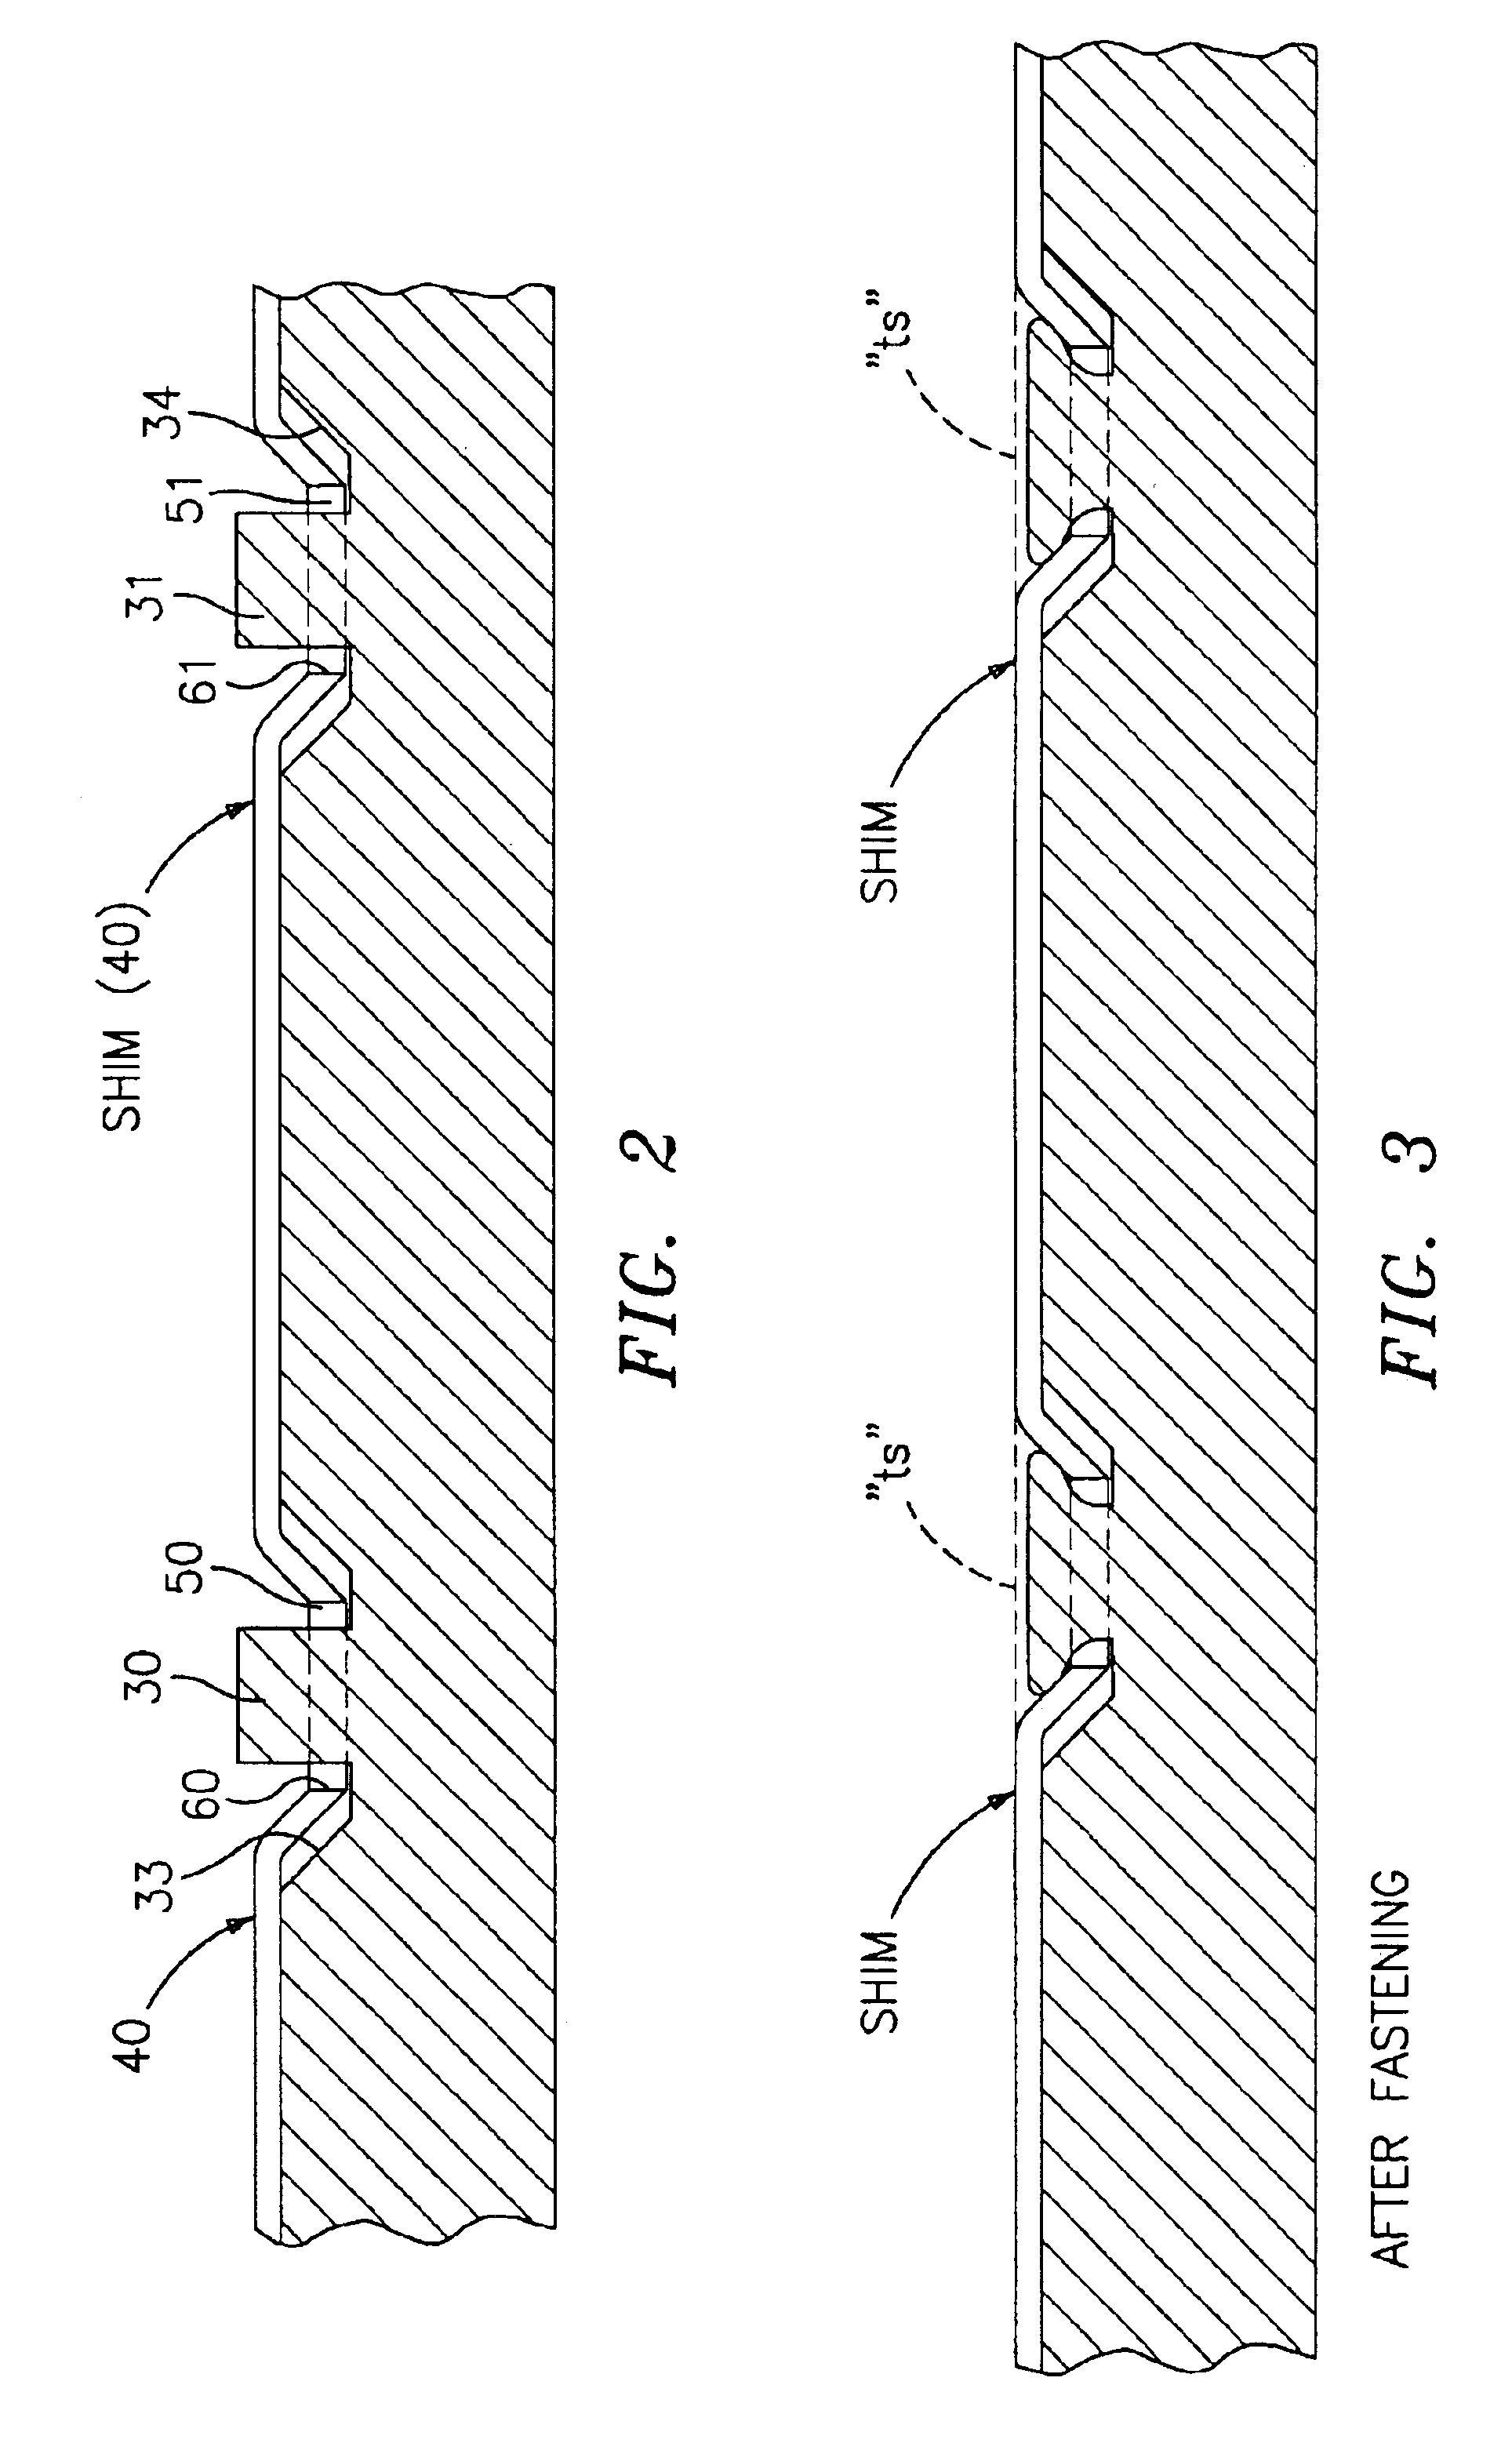 Method of securing a shim to a backing plate and subassembly formed thereby